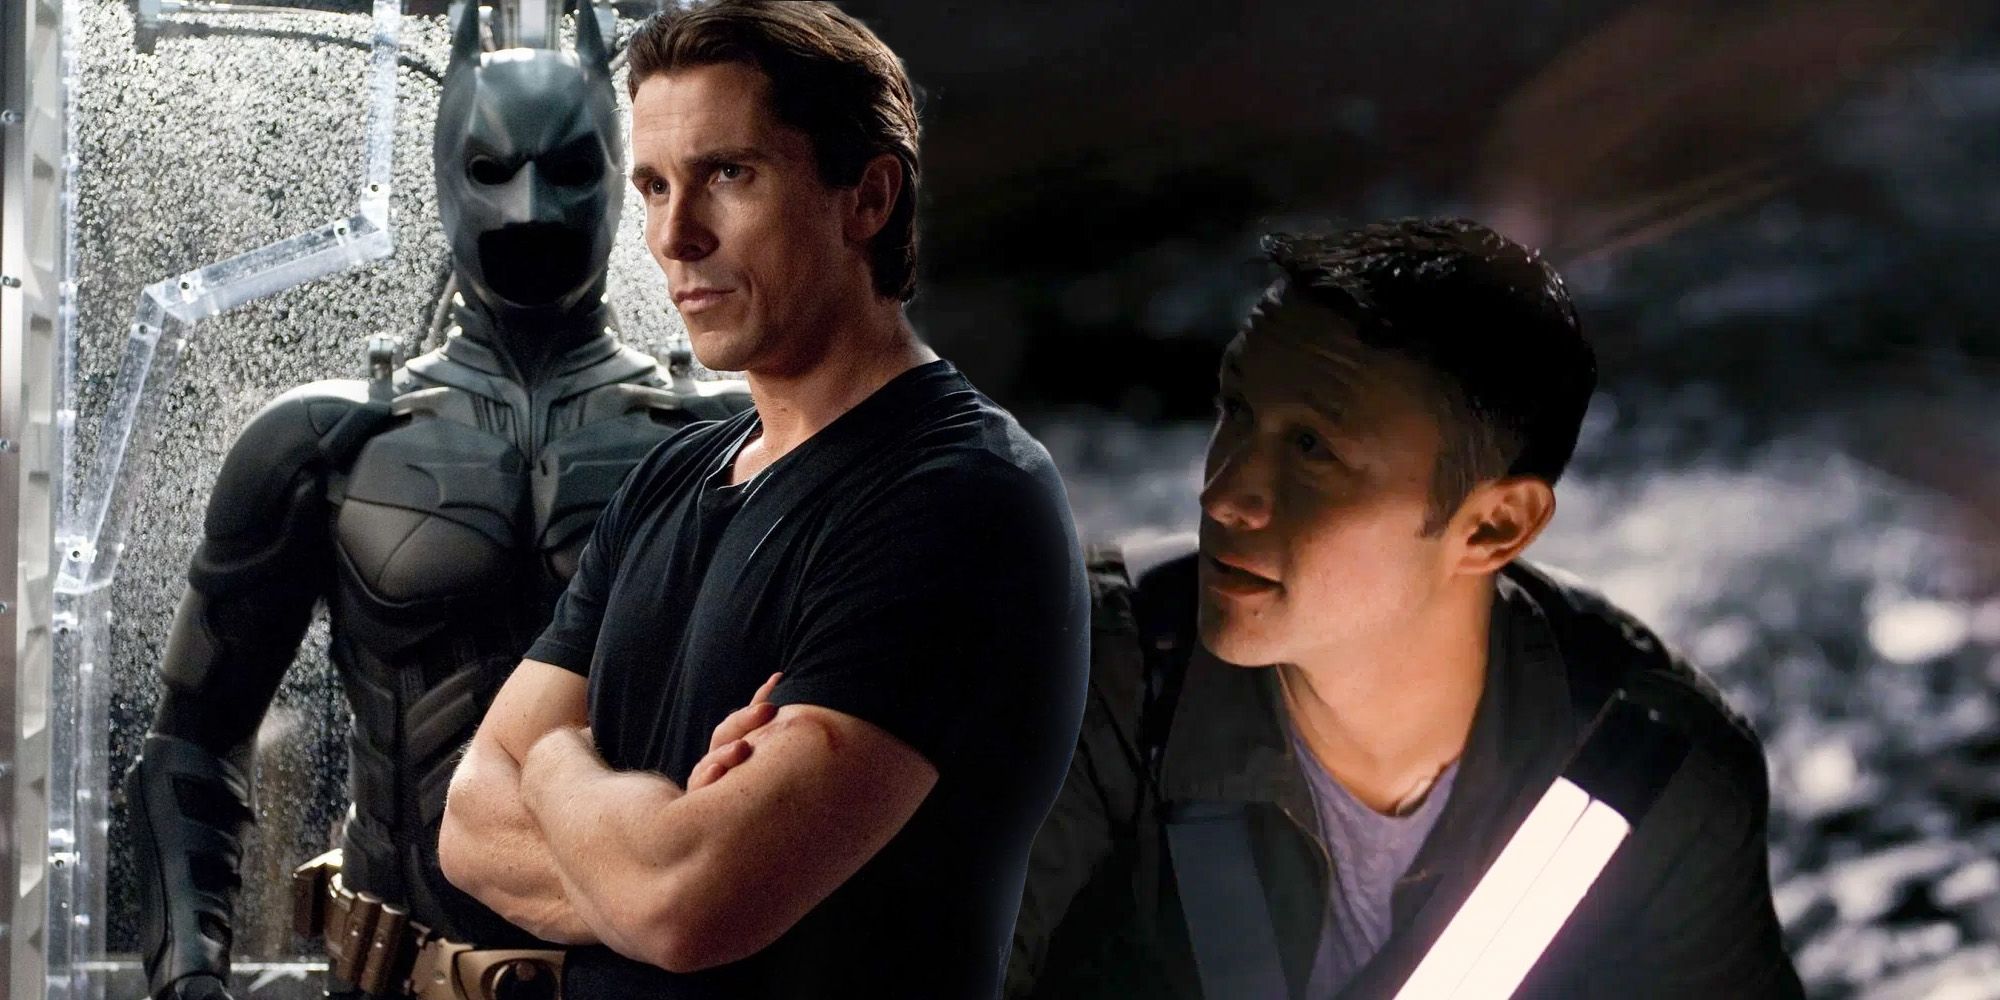 The Dark Knight Rises Ending Ignored The Trilogy's Own Message